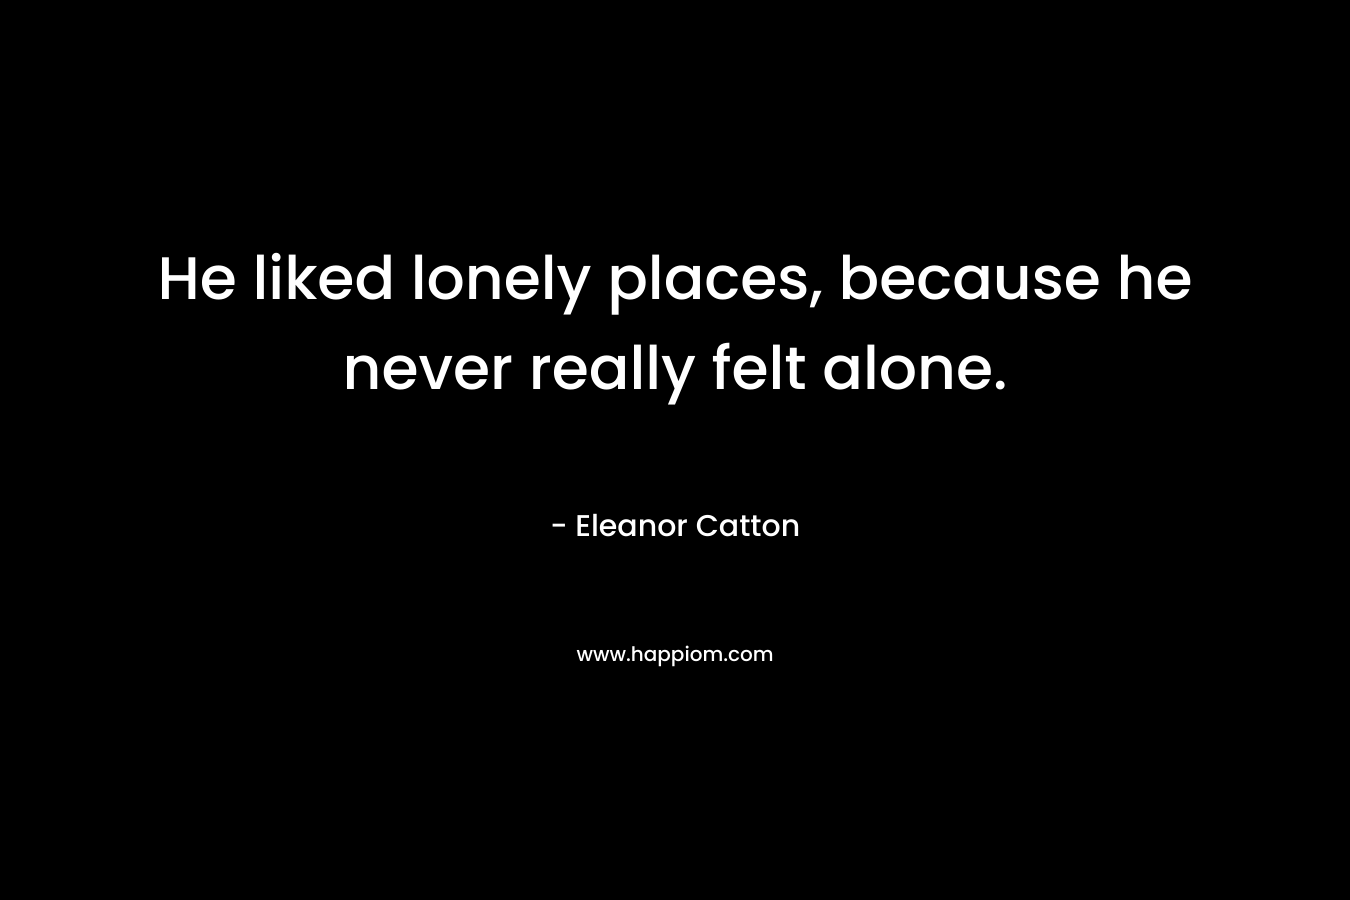 He liked lonely places, because he never really felt alone.